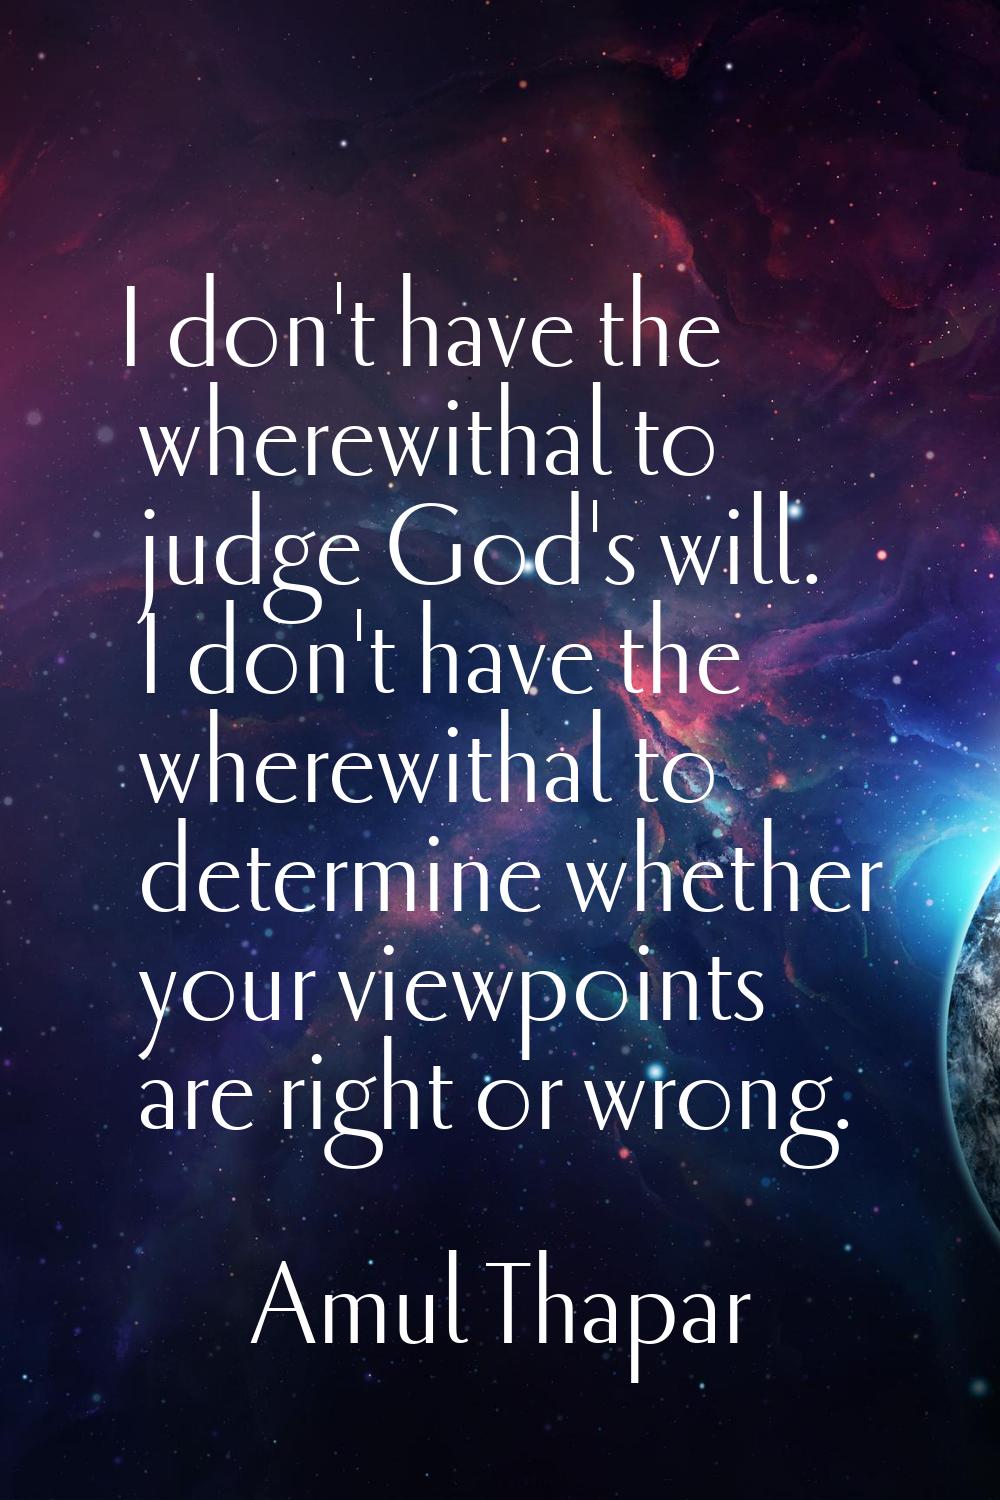 I don't have the wherewithal to judge God's will. I don't have the wherewithal to determine whether